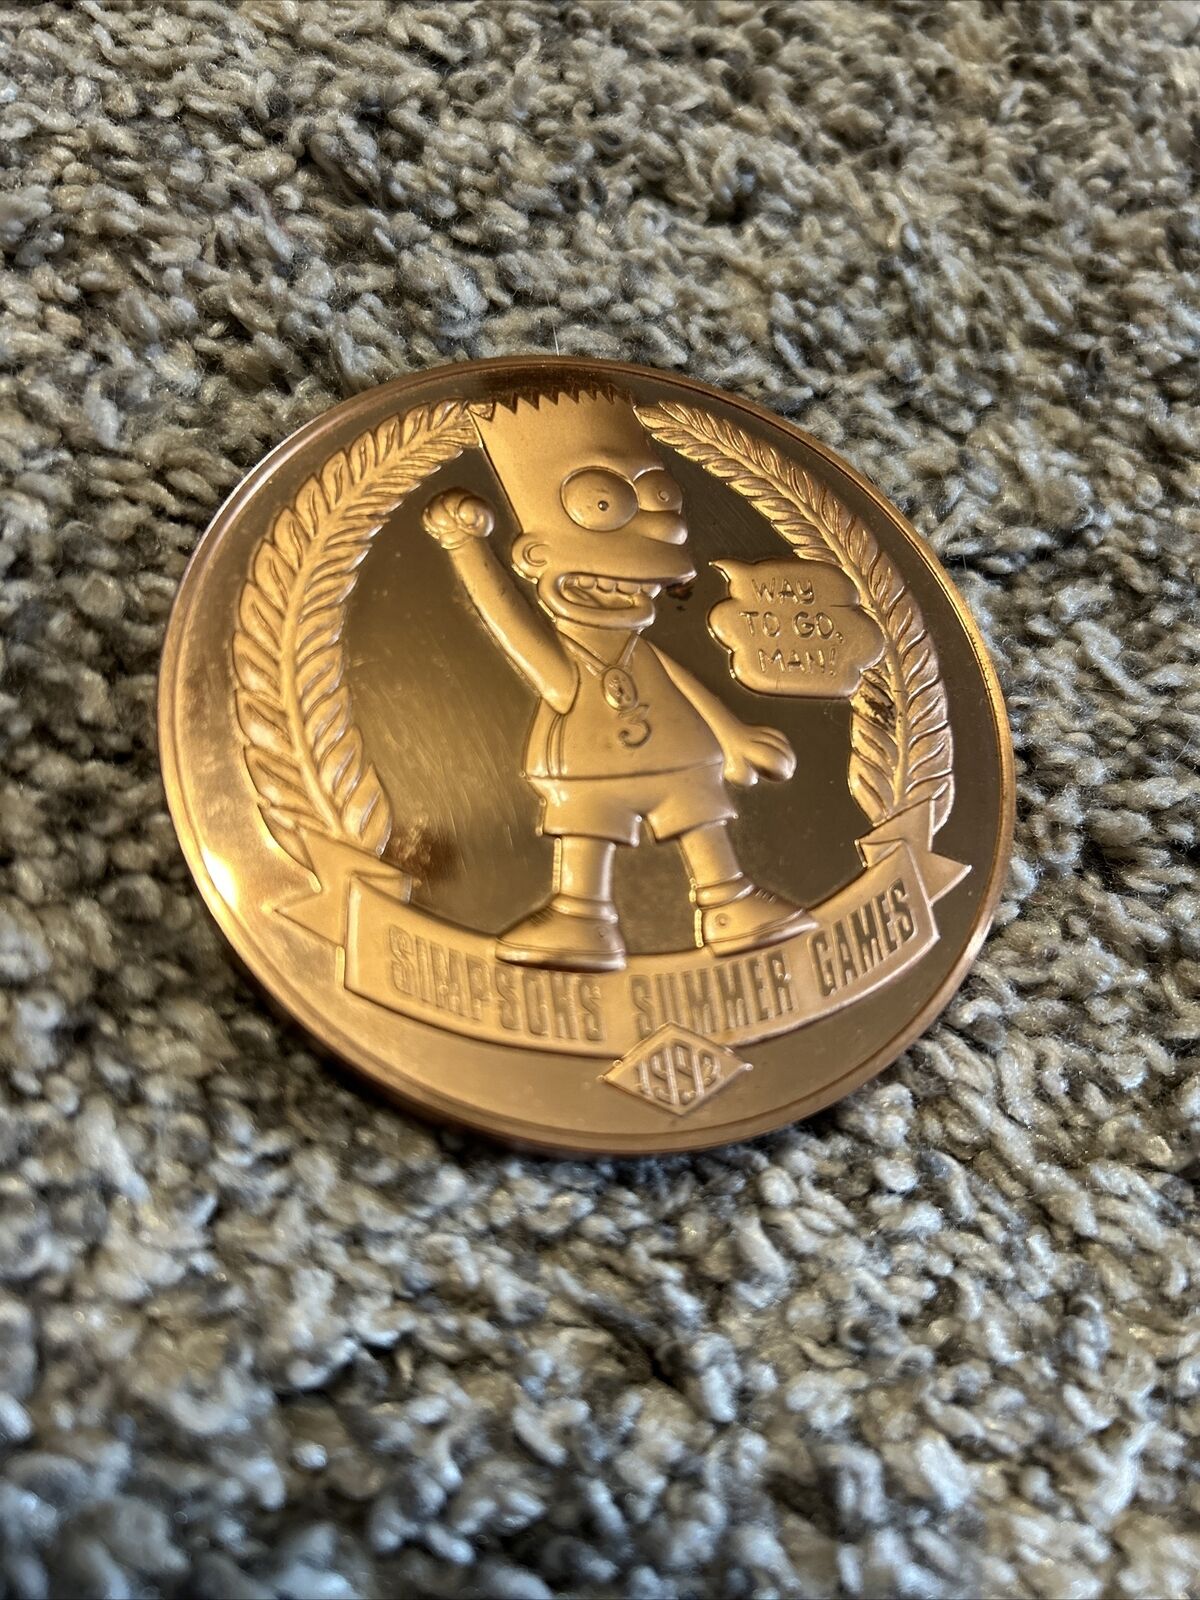 1992 Bart Simpsons Summer Olympics Bronze Medal 8oz Limited Edition  #2437/5000.